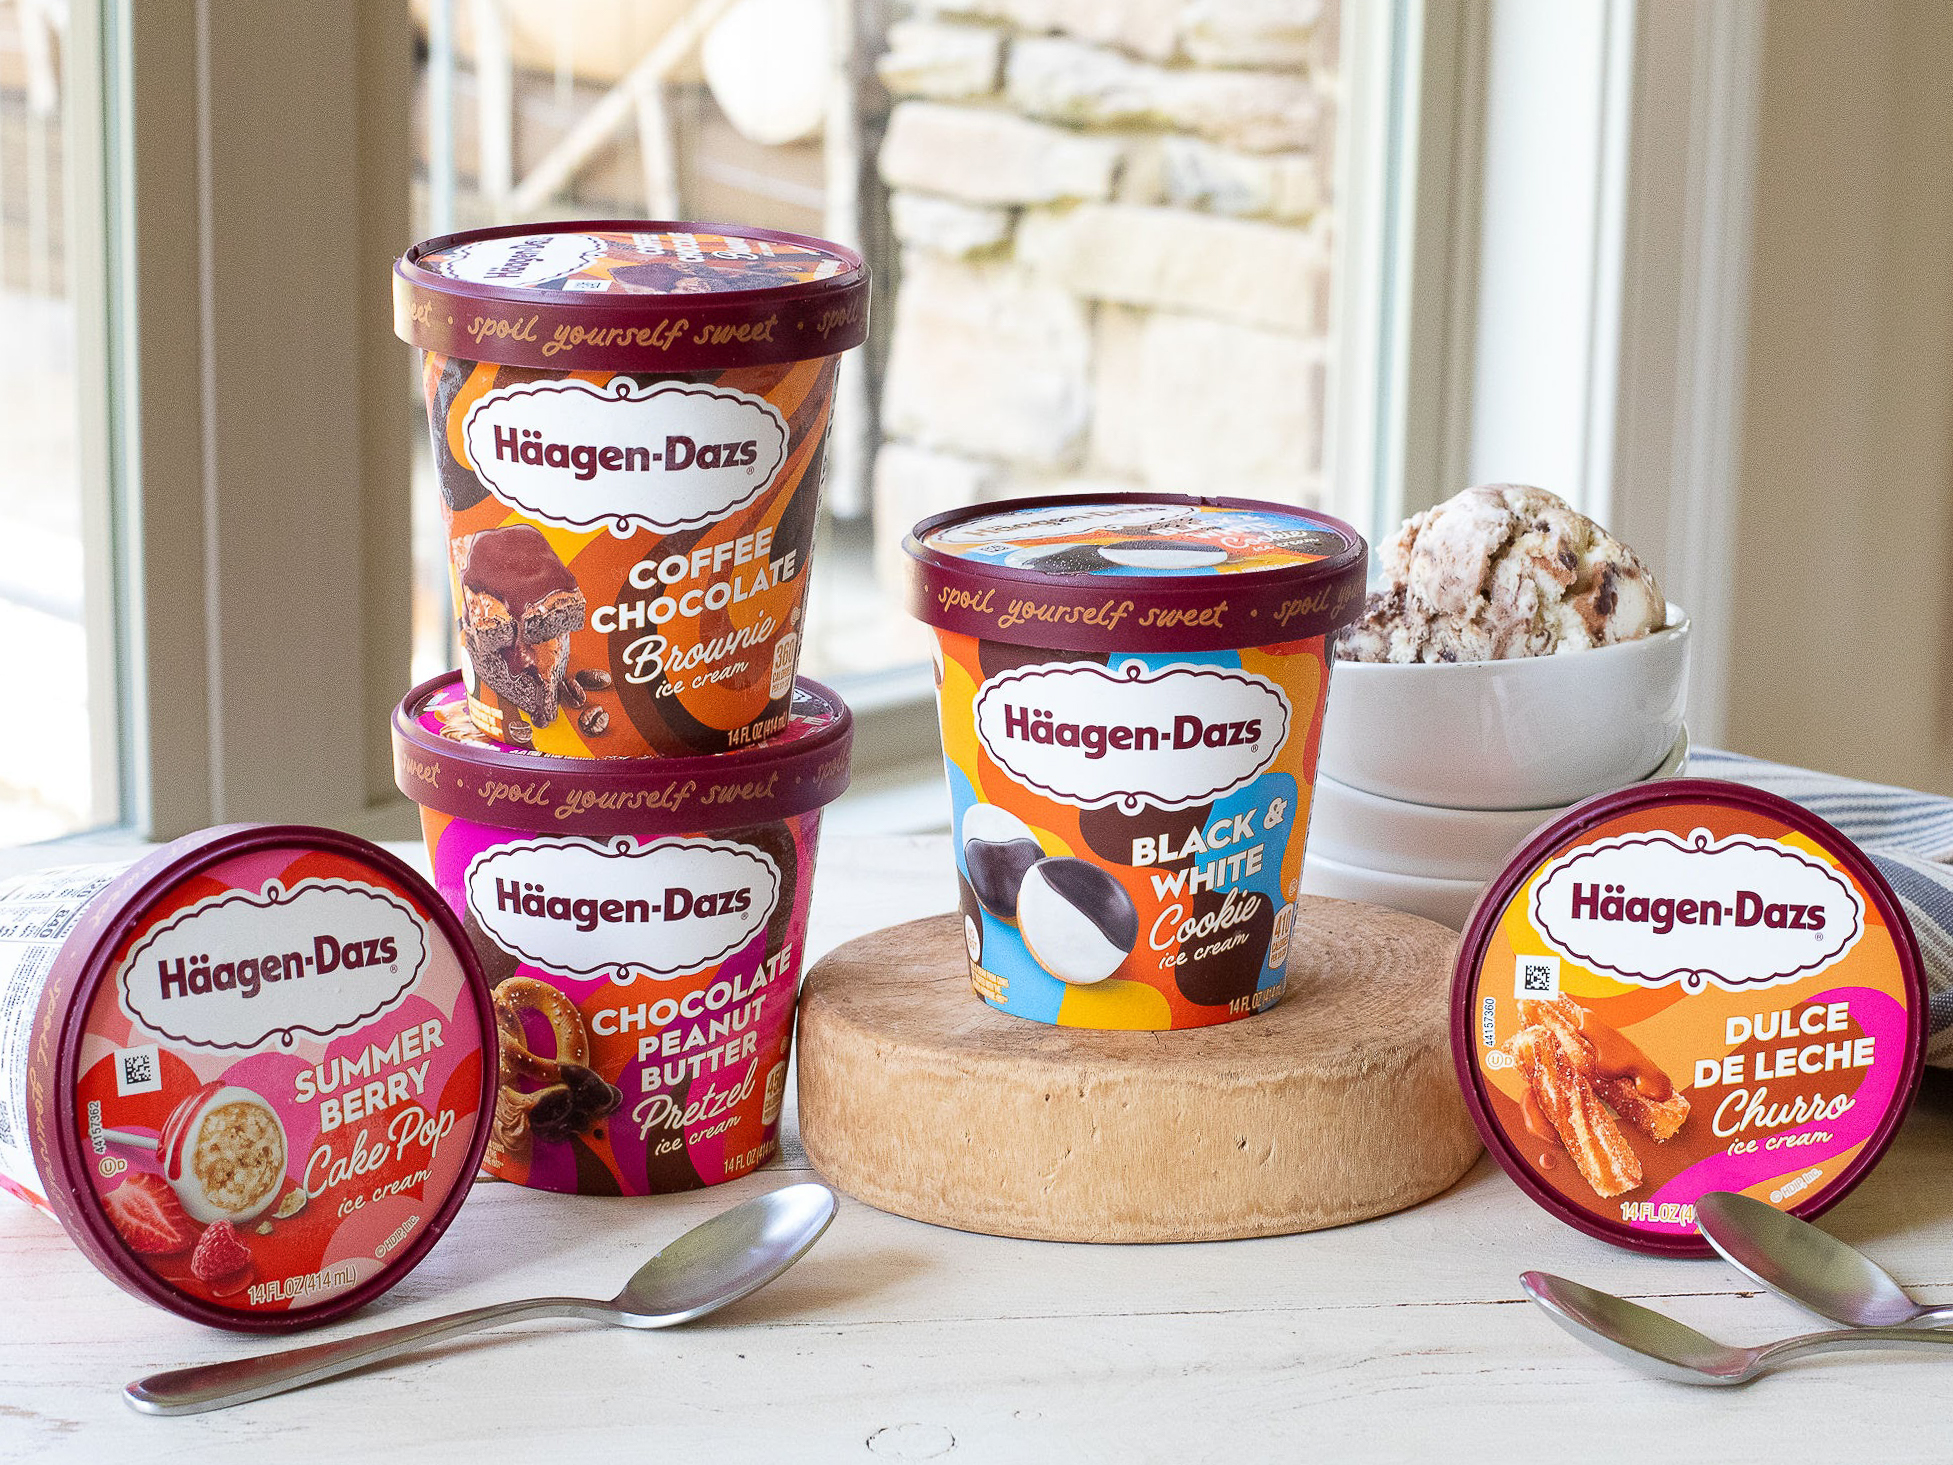 Get Haagen-Dazs Ice Cream For Just $4 At Kroger – Save Over $2